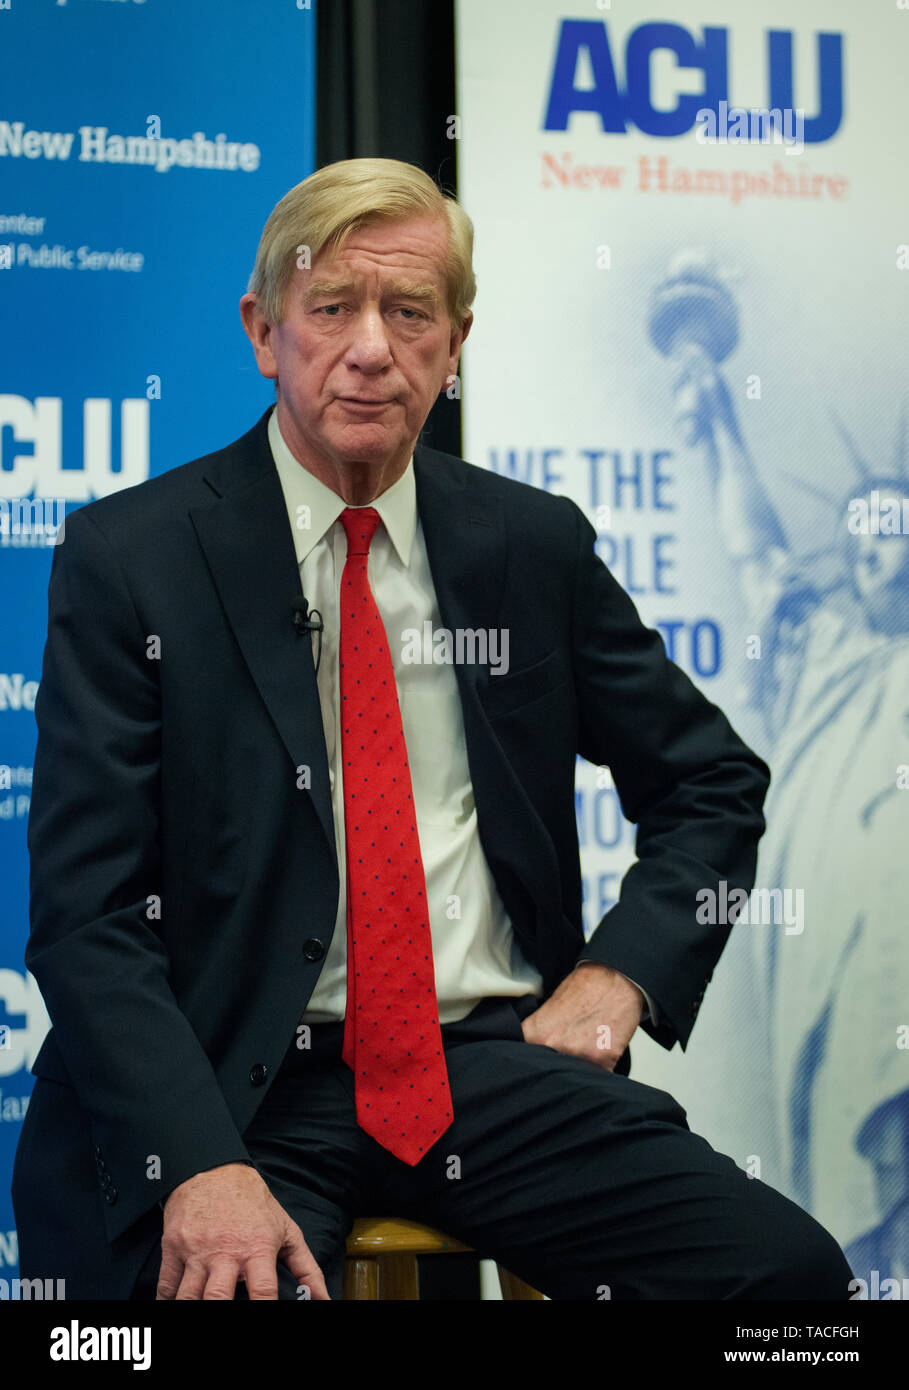 Concord, NH, USA May 23 2019.  Republican Presidential candidate and former Massachusetts Governor Bill Weld spoke to less than 100 people at the University of New Hampshire School of Law in Concord, NH.  The event, Civil Liberties & The Presidency, was organized by the New Hampshire American Civil Liberties Union (ACLU). Stock Photo